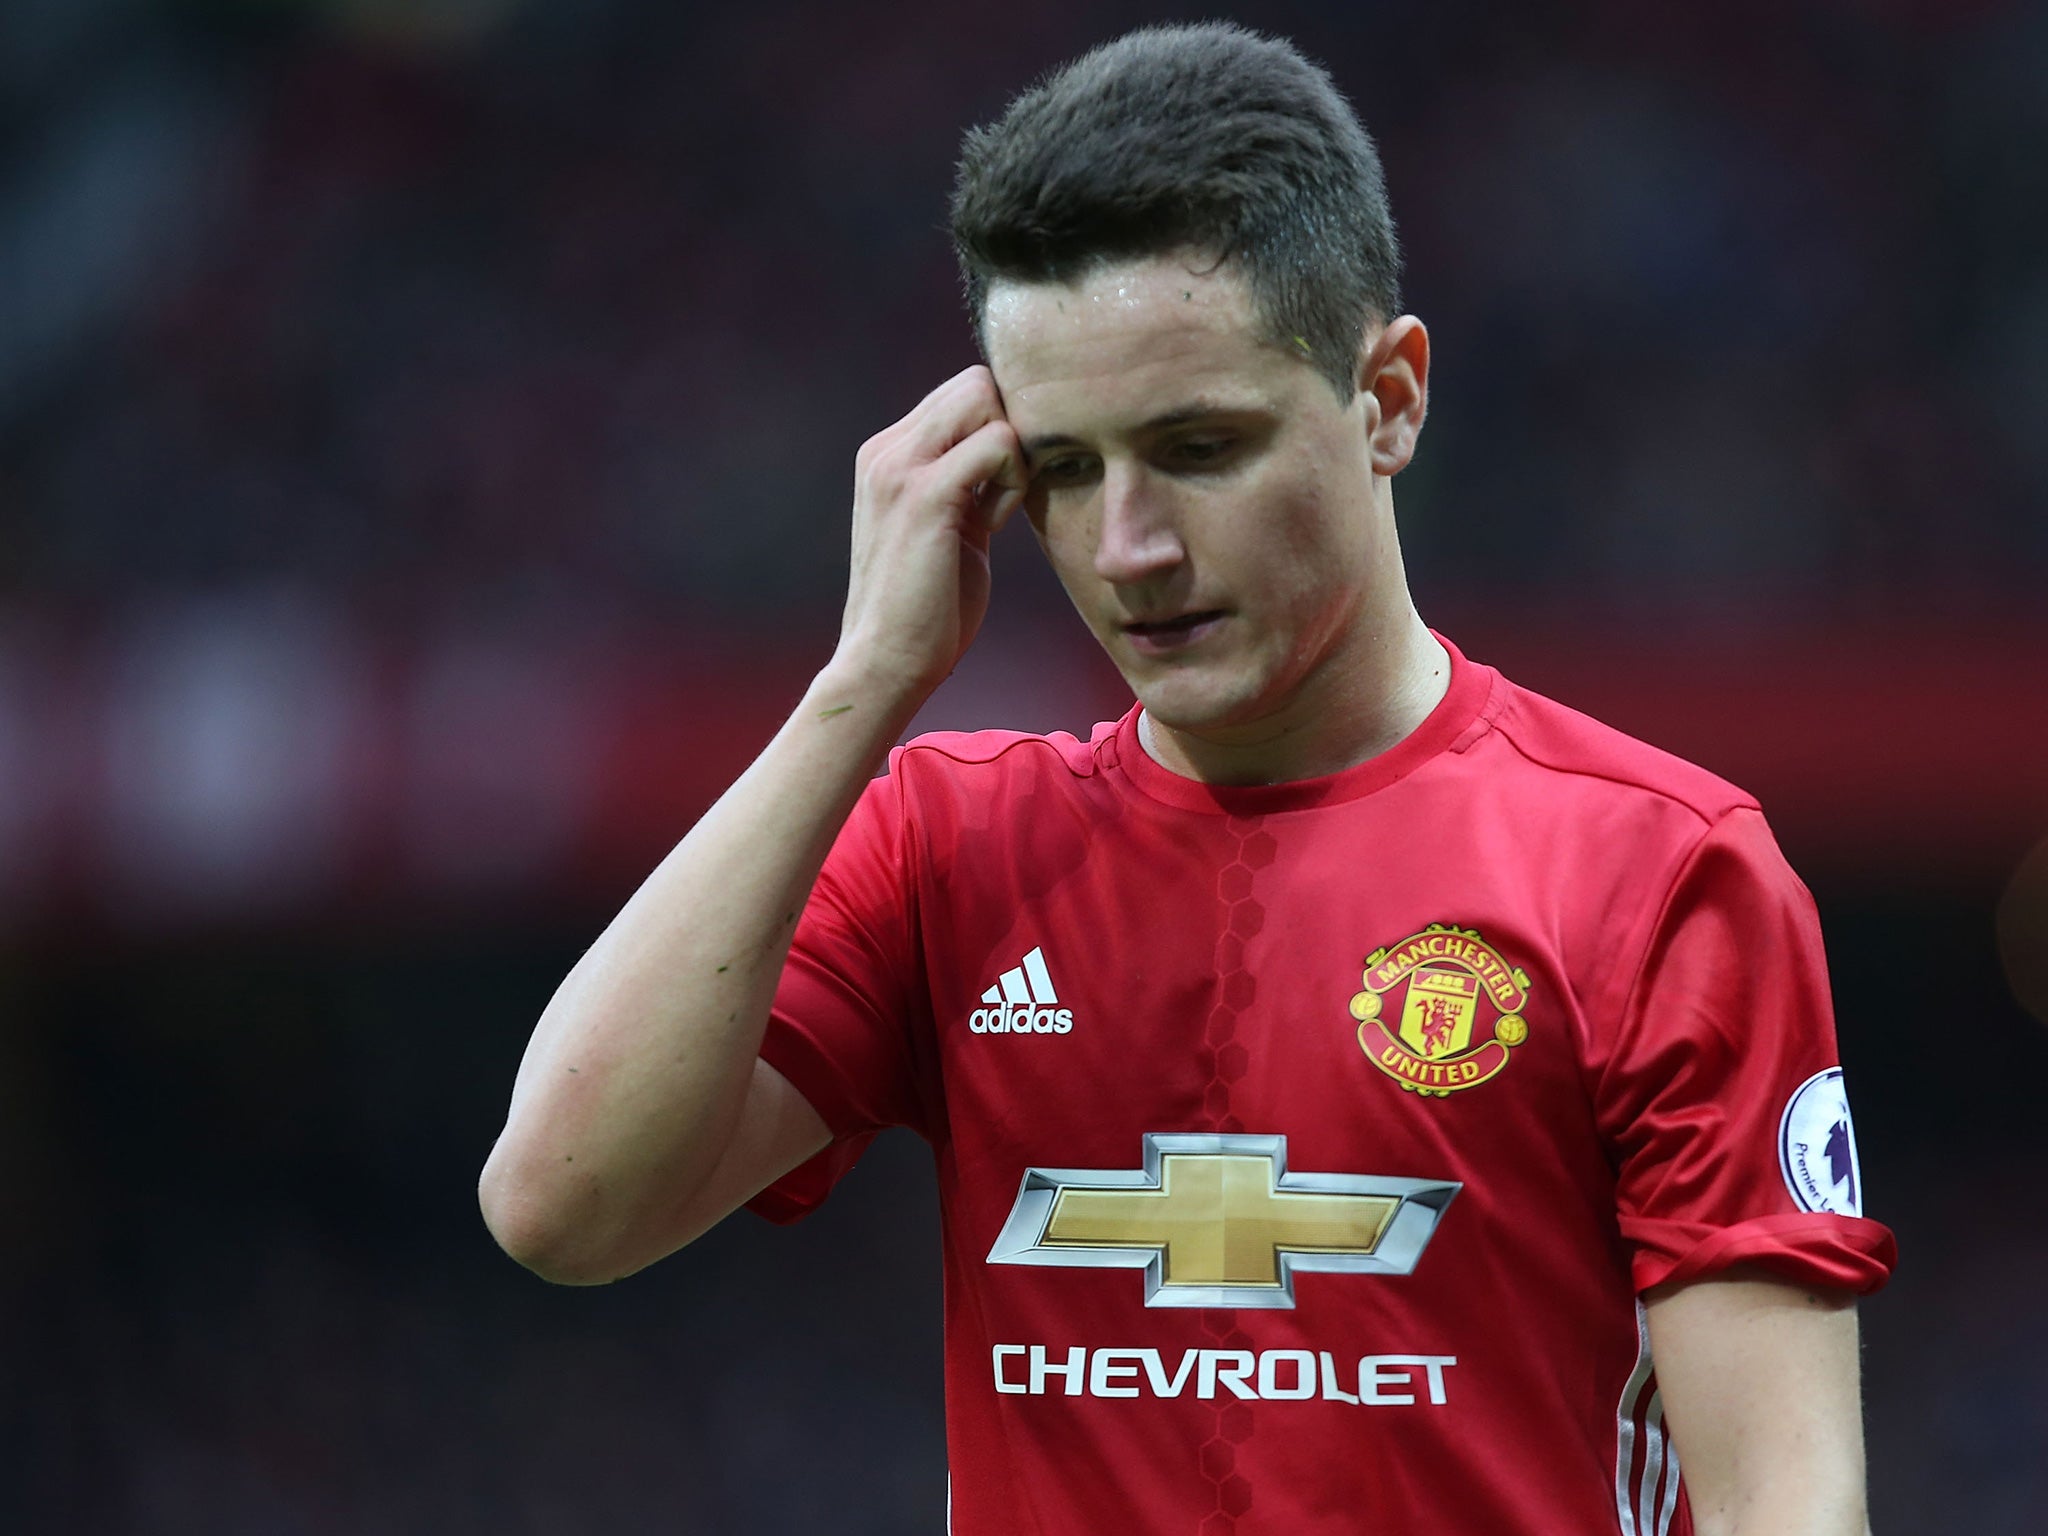 Herrera walks off the Old Trafford pitch after receiving a second yellow card